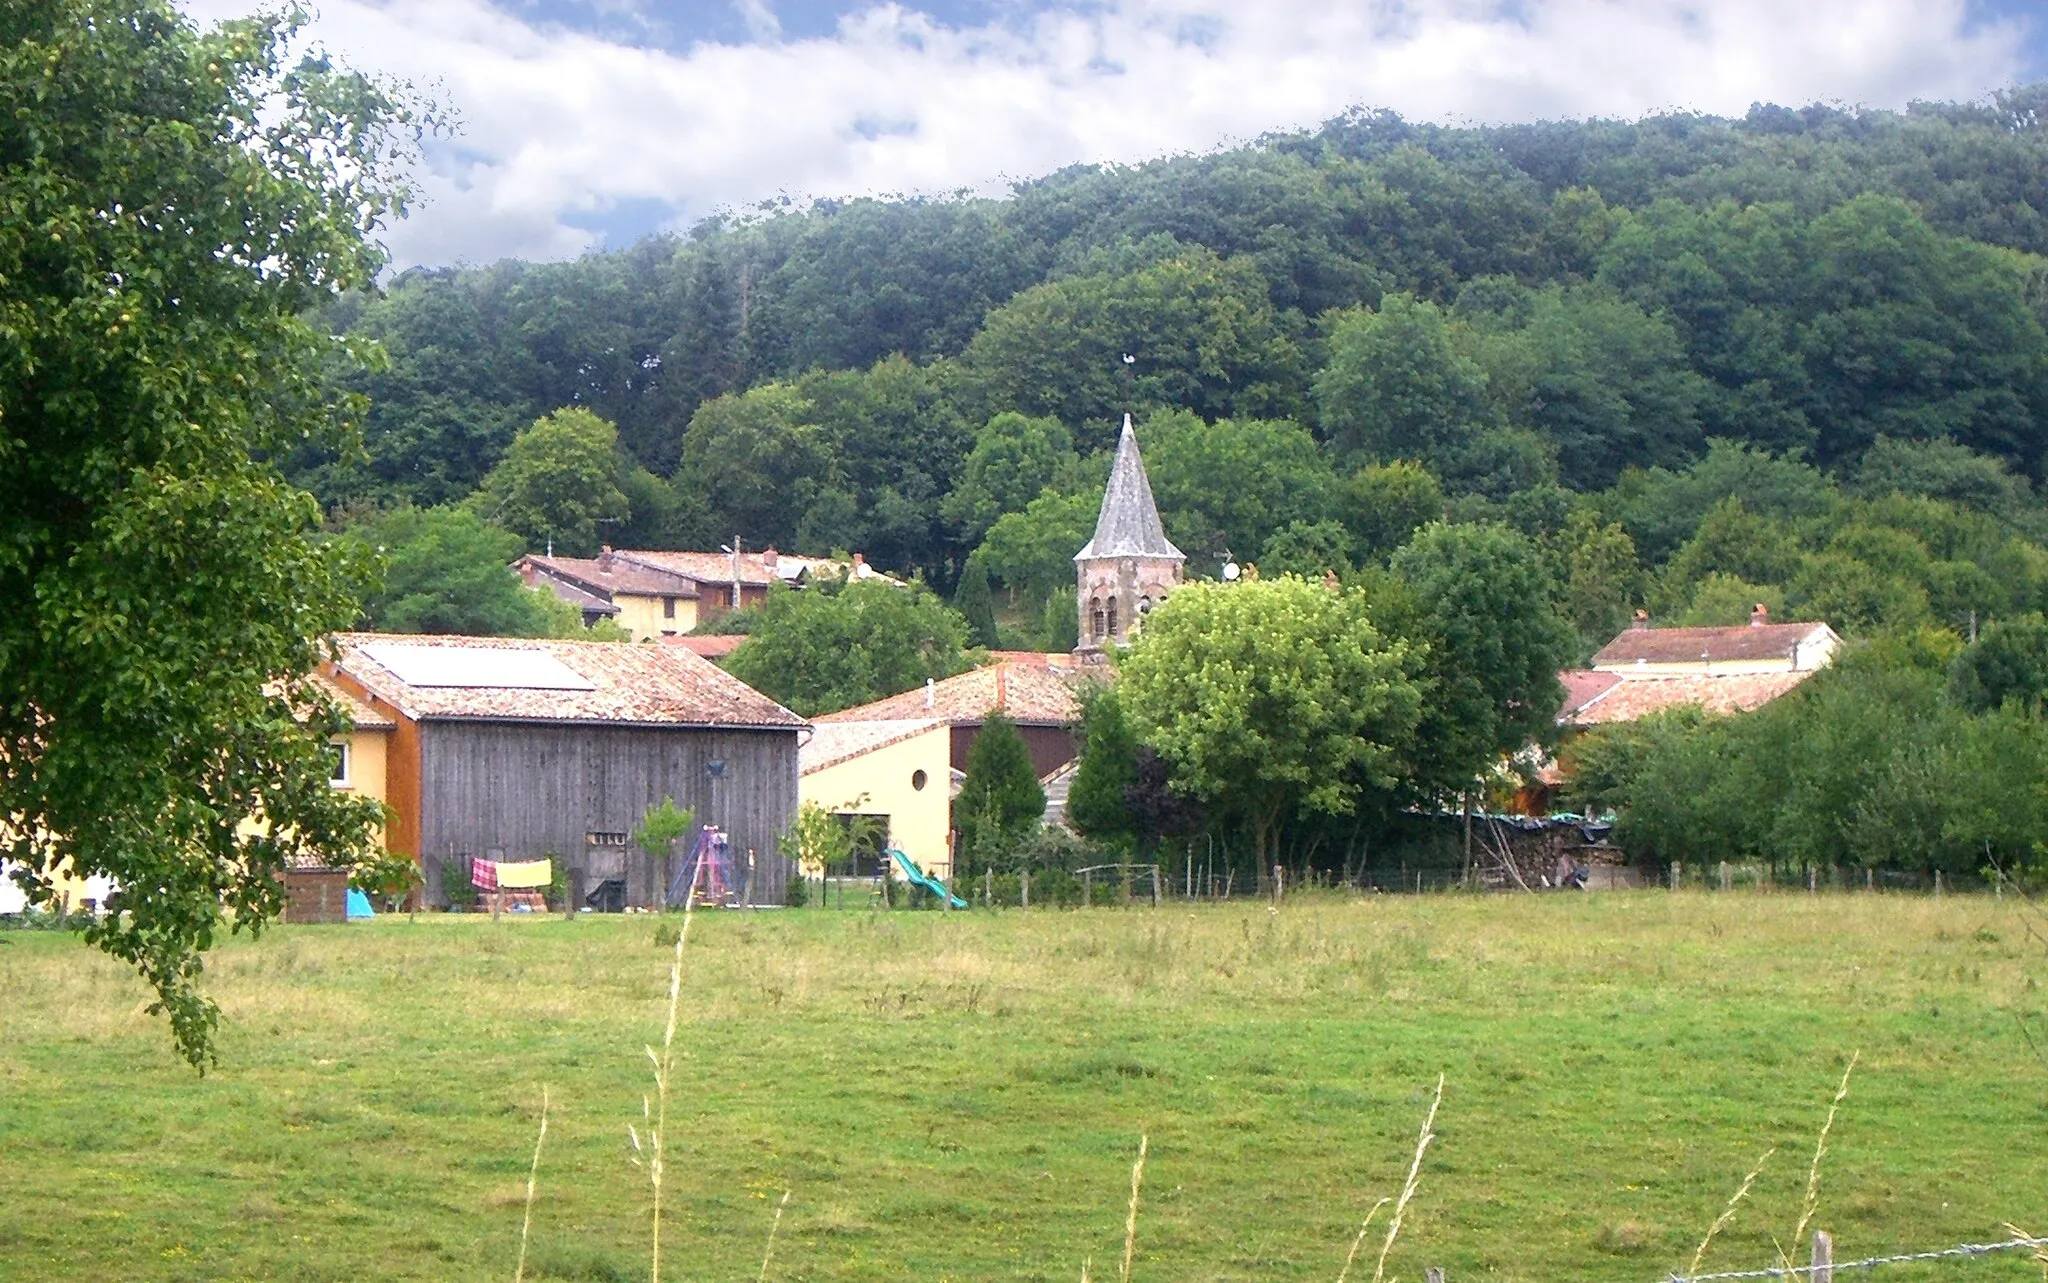 Photo showing: Le Neufour is a small village situated on the border of the Argonne forest in the French department of Meuse in the region of Lorraine.